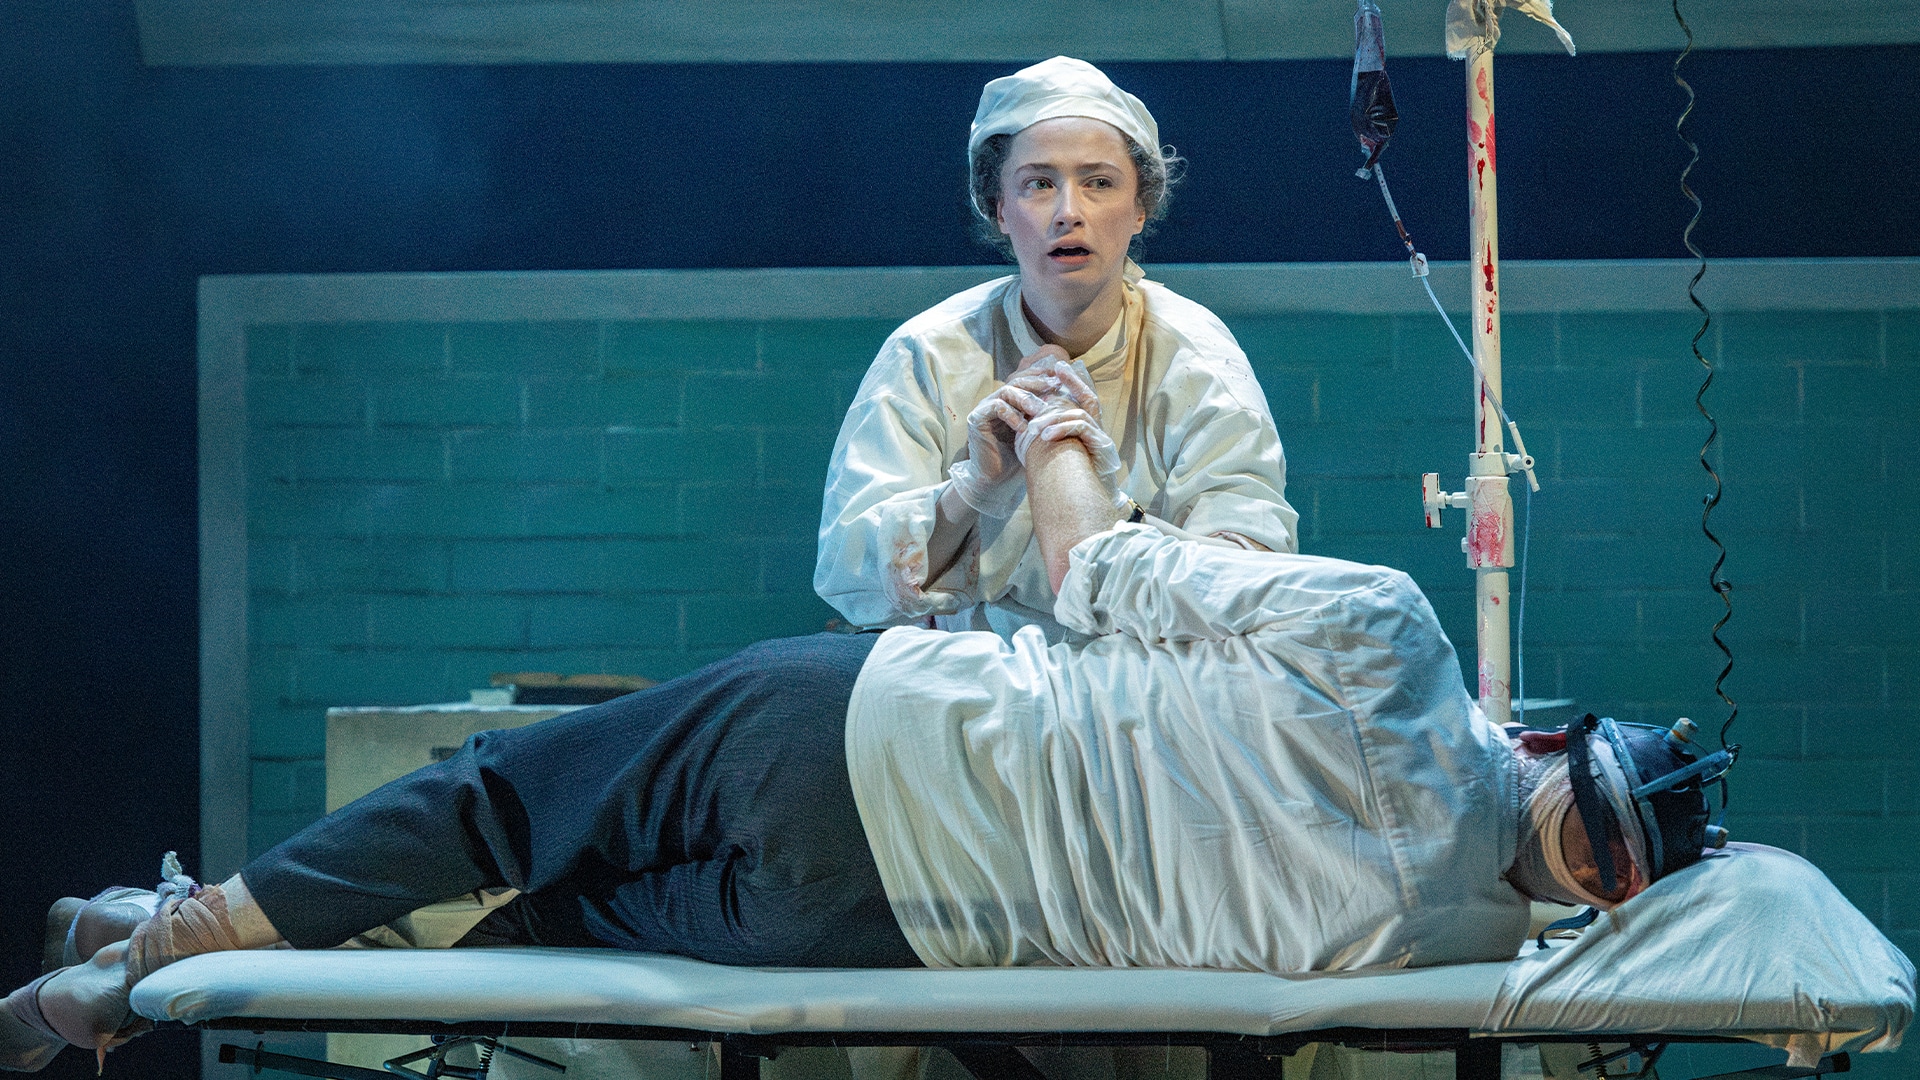 Frankenstein production photo. Theatre stage. Inside a clinical hospital room with light blue brick walls. A young woman wearing a surgeons cap and gown holds the hand of Frankenstein's monster, who is lying on a makeshift hospital bed.